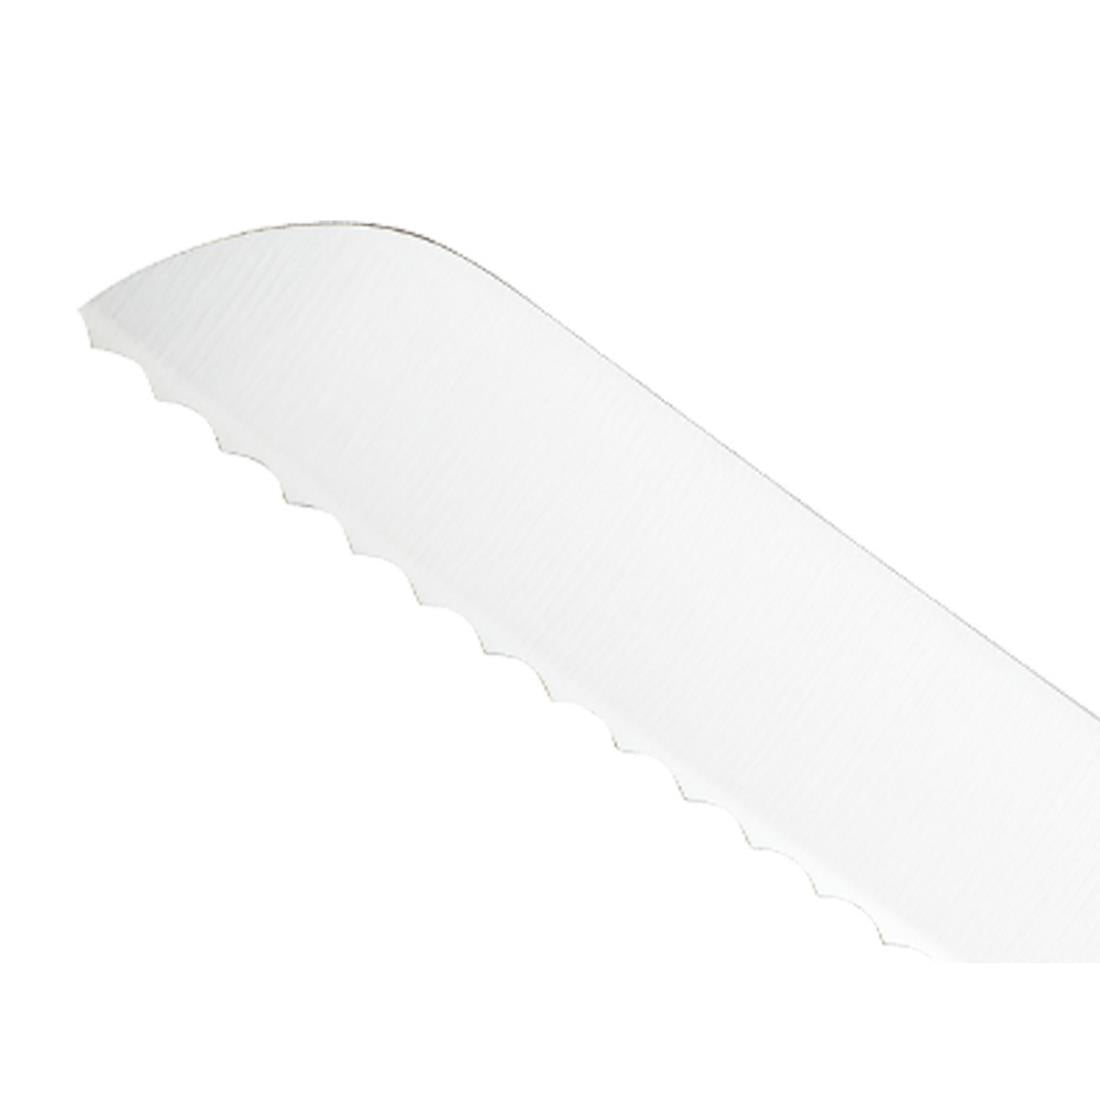 FW711 Mercer Culinary Genesis Precision Forged Bread Knife 20.3cm JD Catering Equipment Solutions Ltd